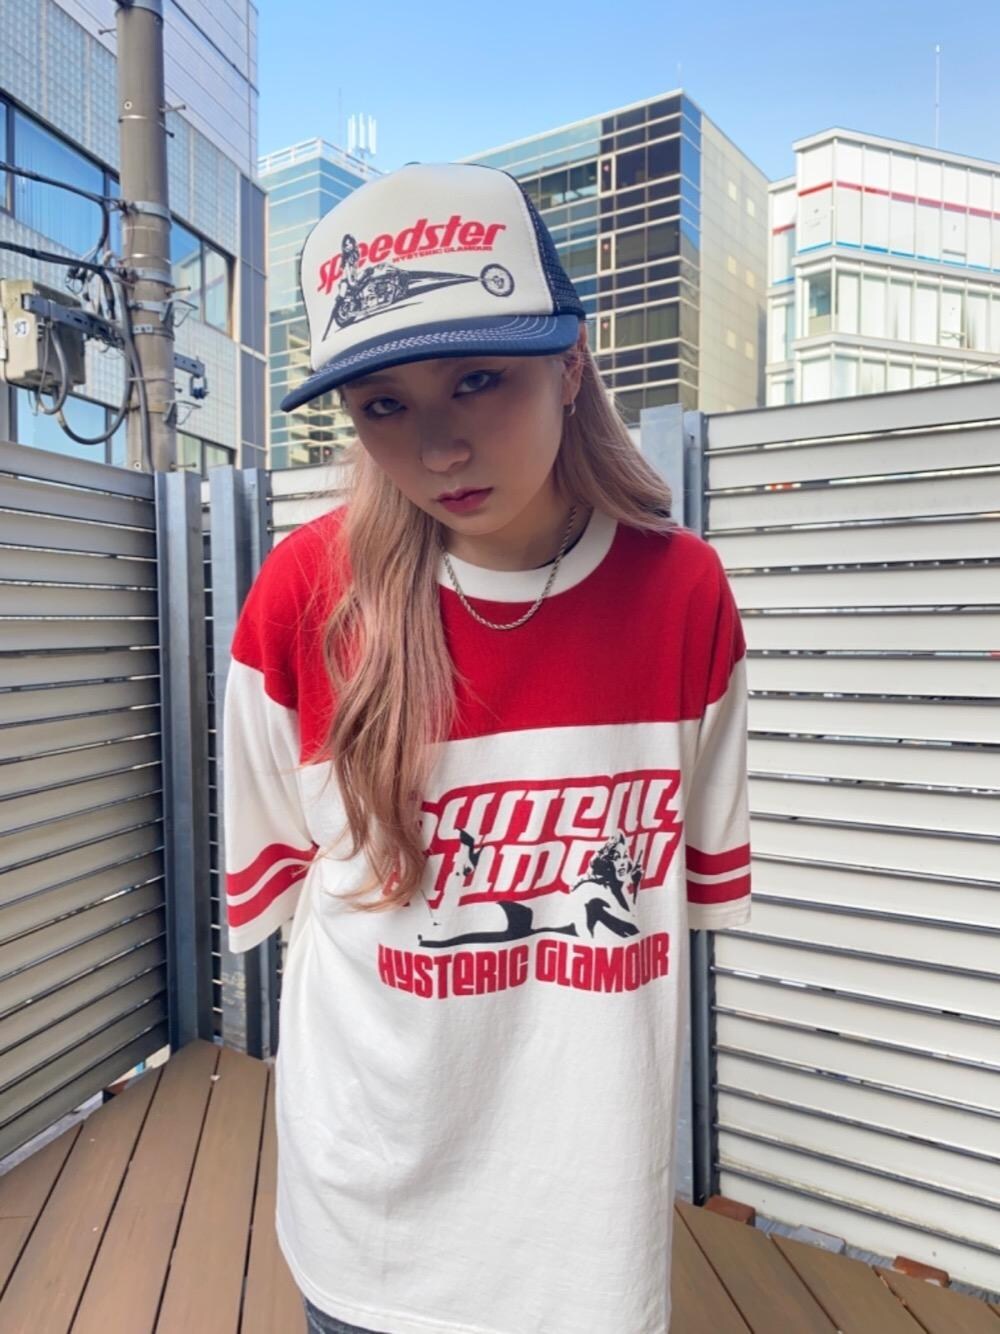 HYSTERIC GLAMOUR スピードスター メッシュキャップ新品未使用 メール